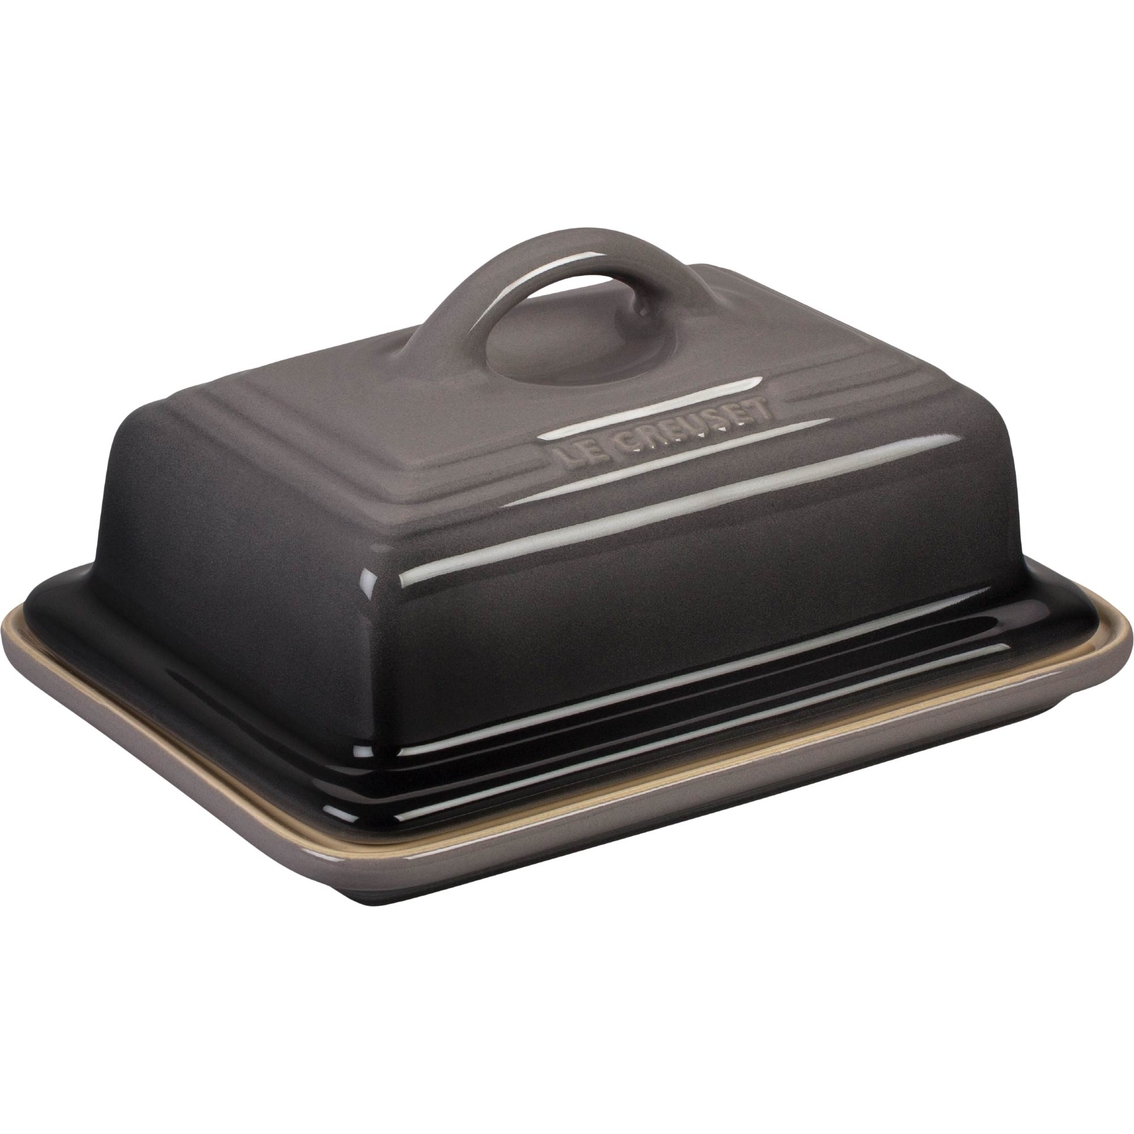 Le Creuset Heritage Butter Dish | Serveware | Household | Shop The Exchange